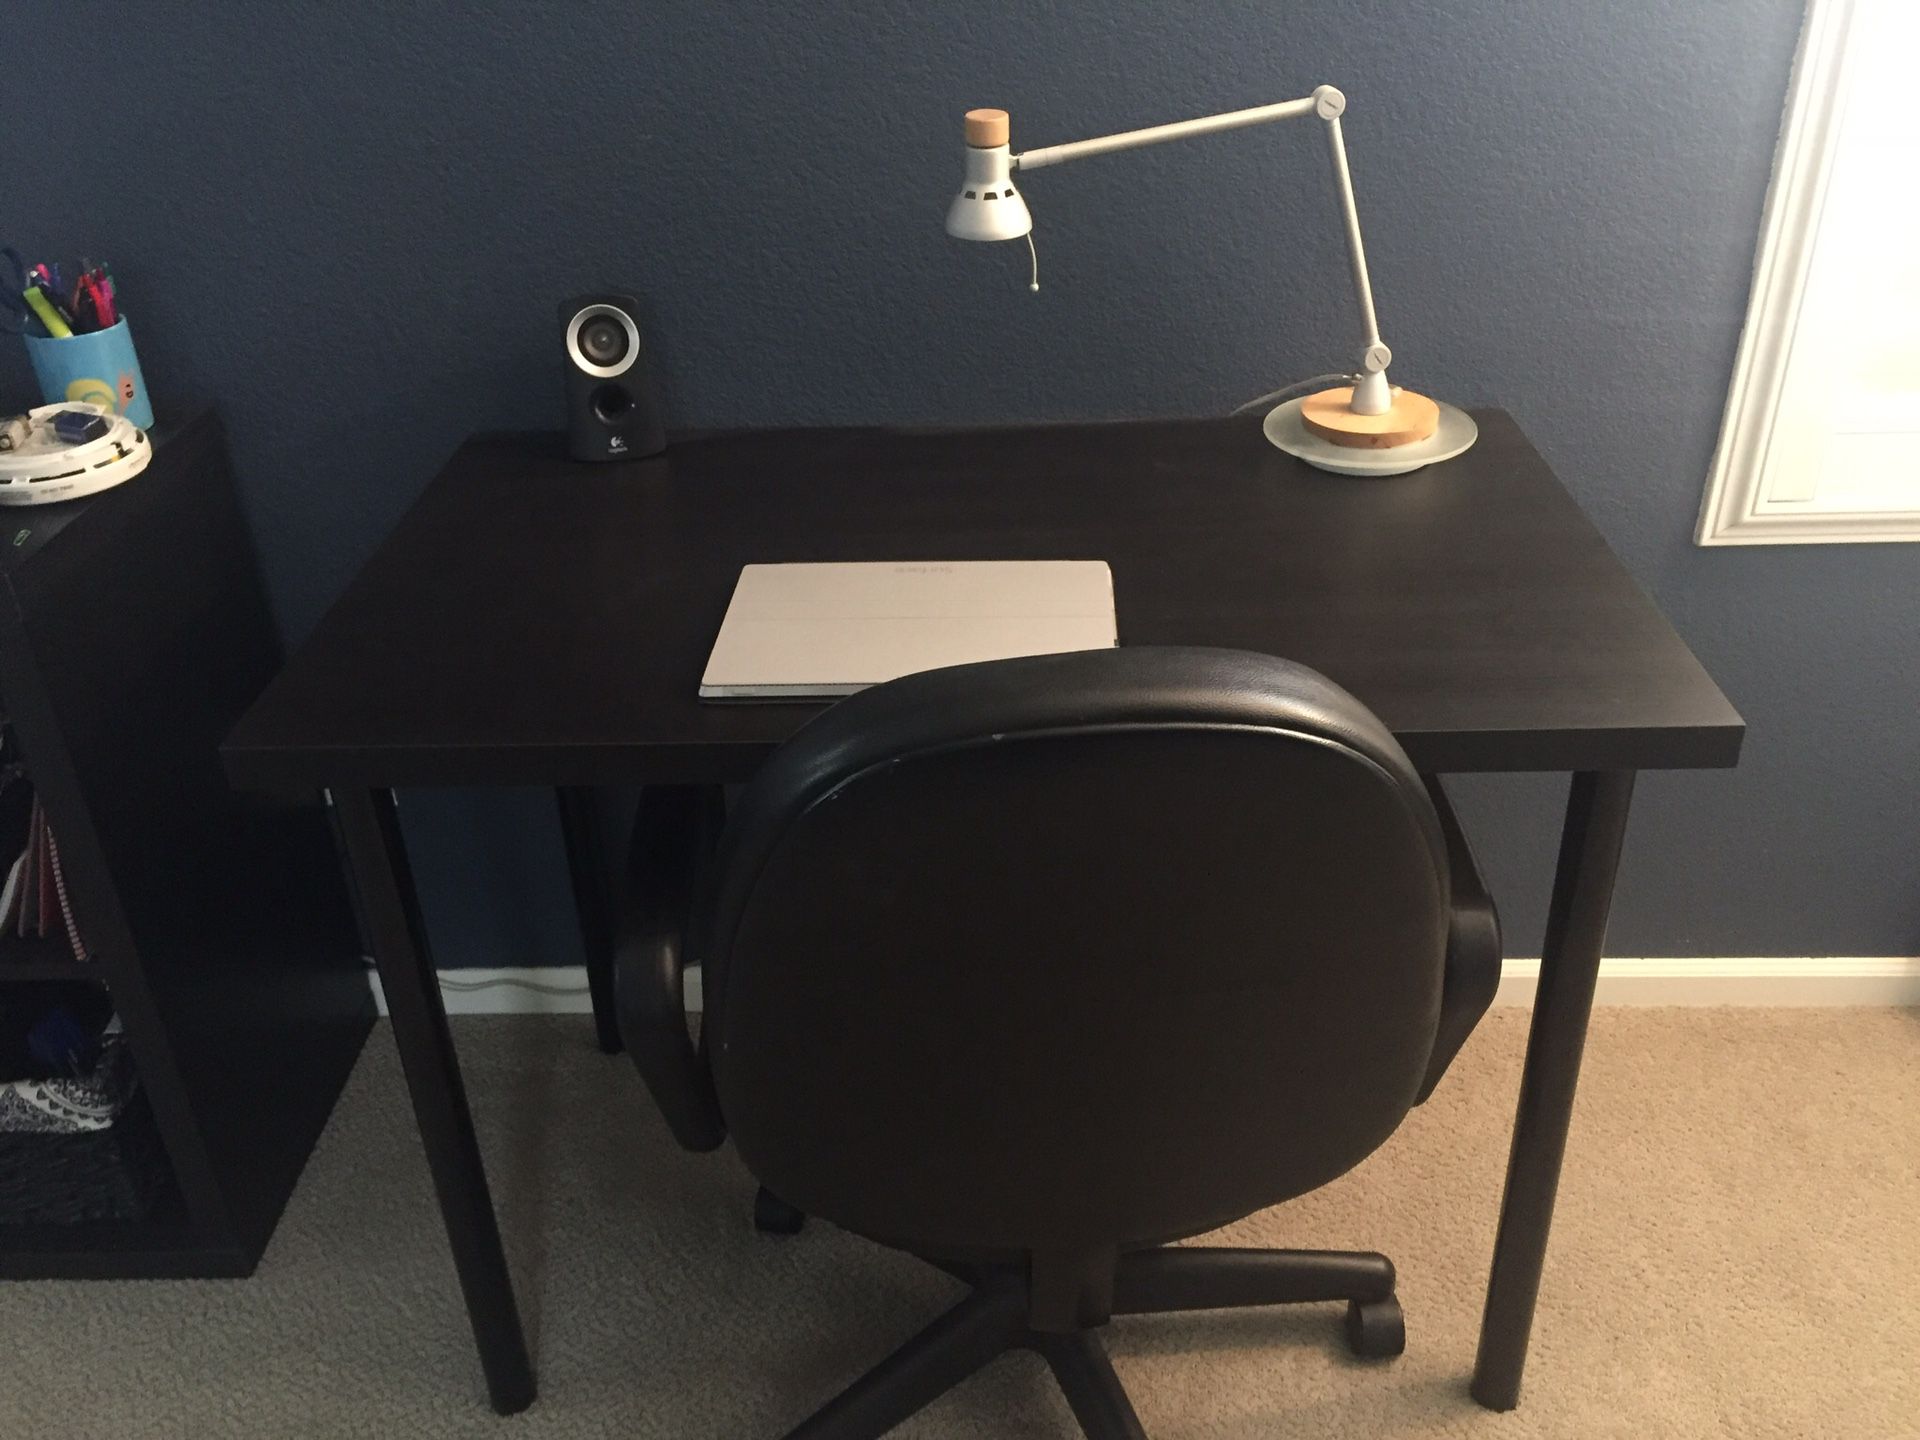 Small desk/table and chair